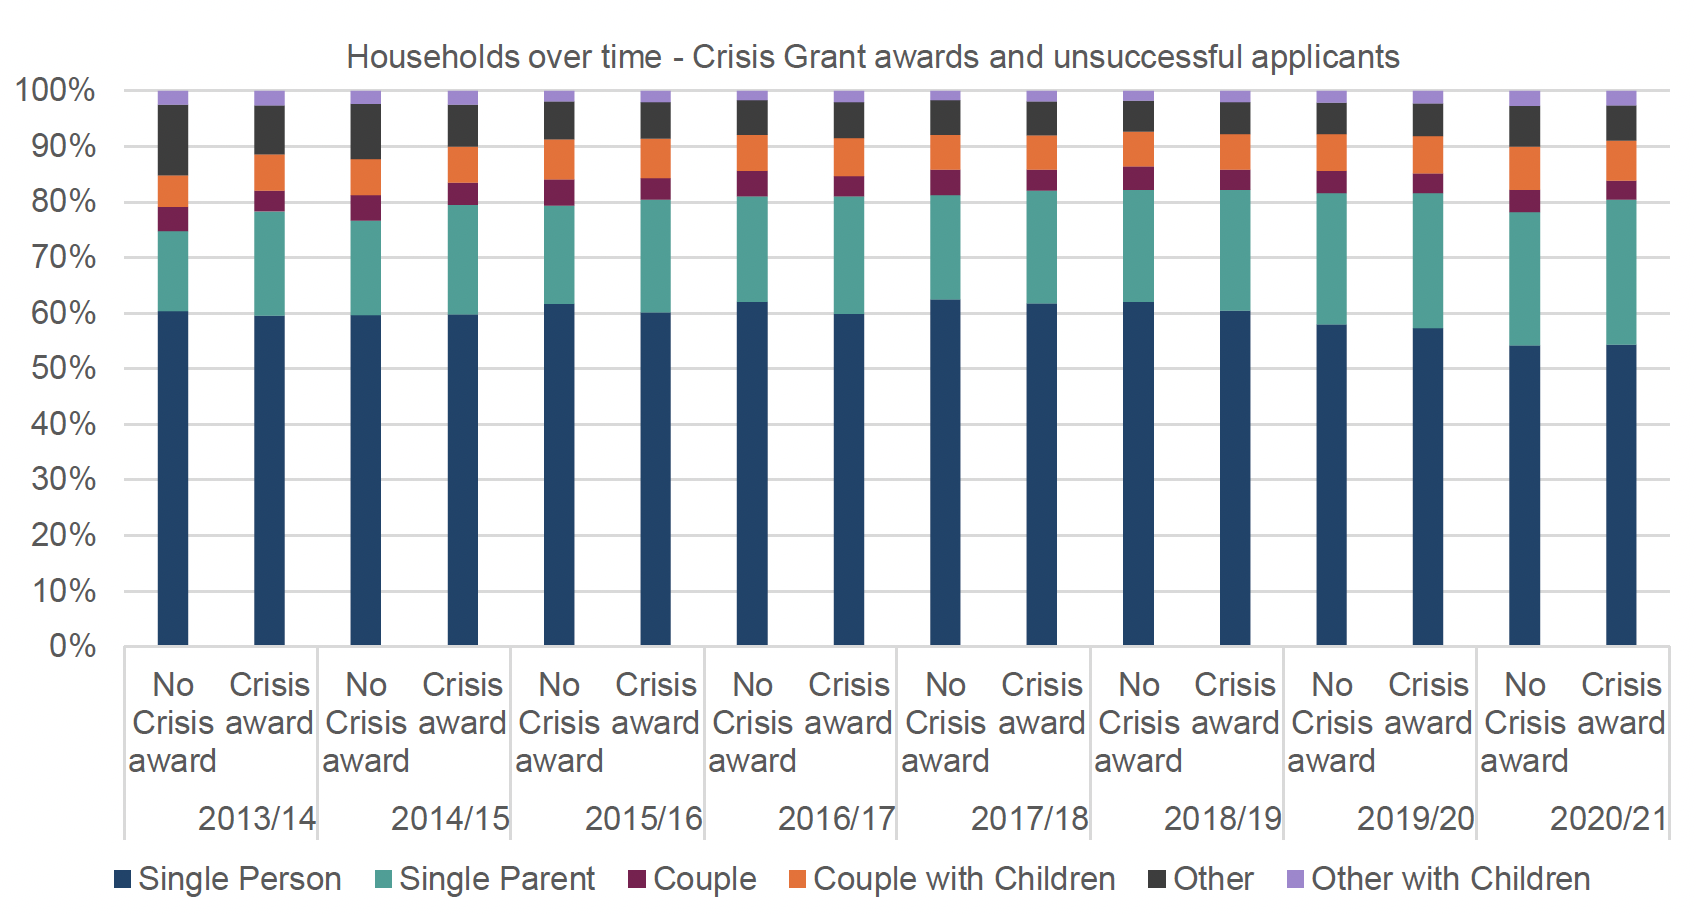 A figure showing a stacked bar graph with the proportion of CG applications that resulted in either an award or no award, by different household types, covering the period 2013/14 to 2020/21. The main trends are described in the text. 